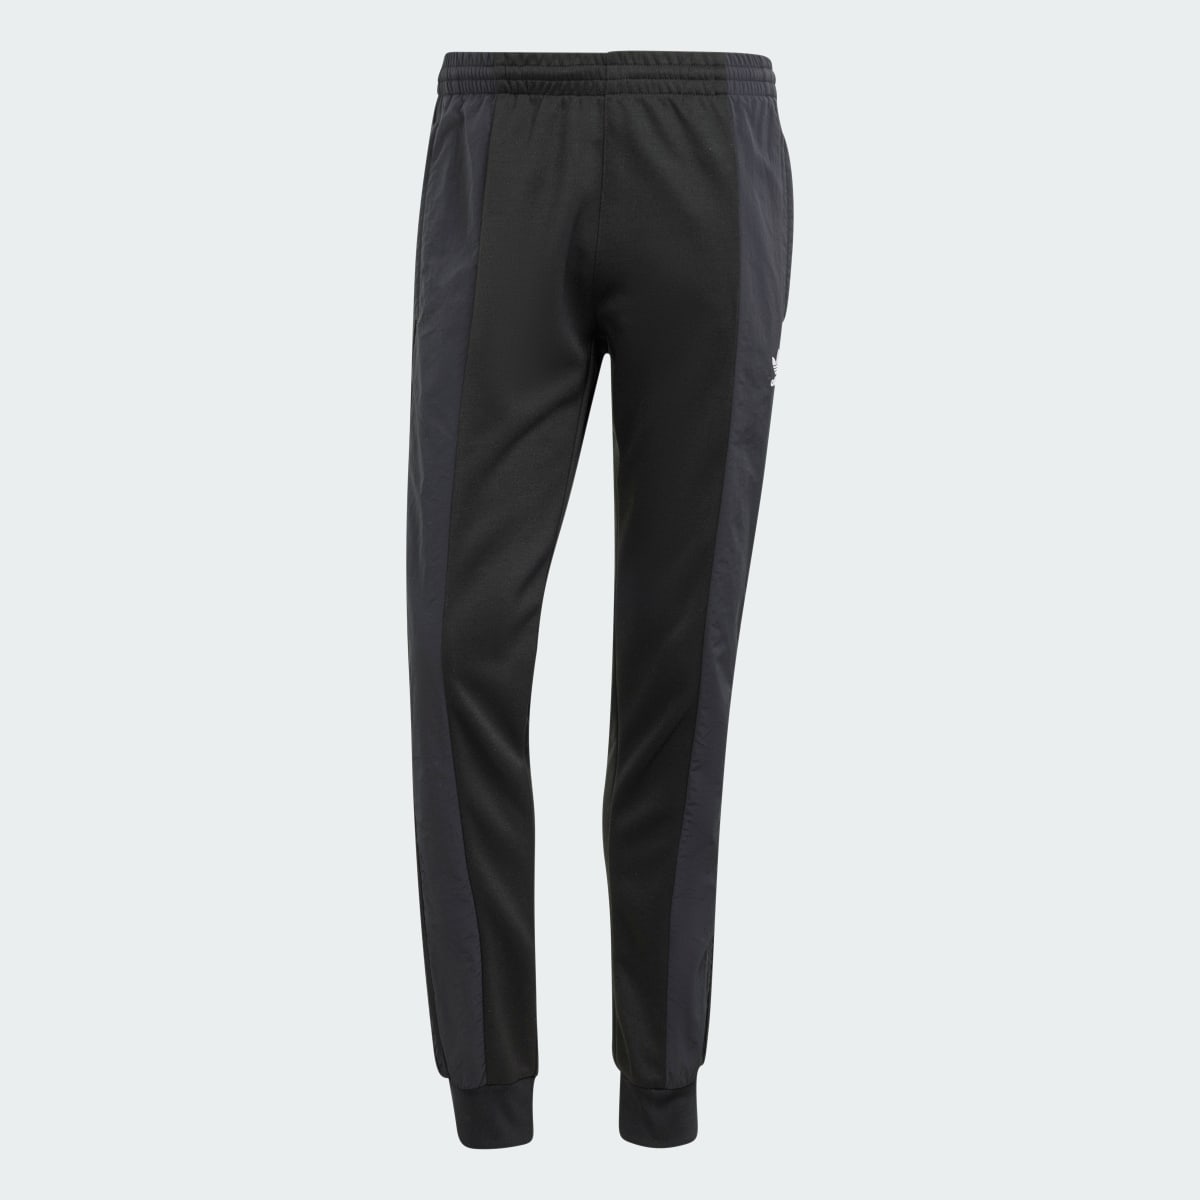 Adidas Adicolor Re-Pro SST Material Mix Track Pants. 4